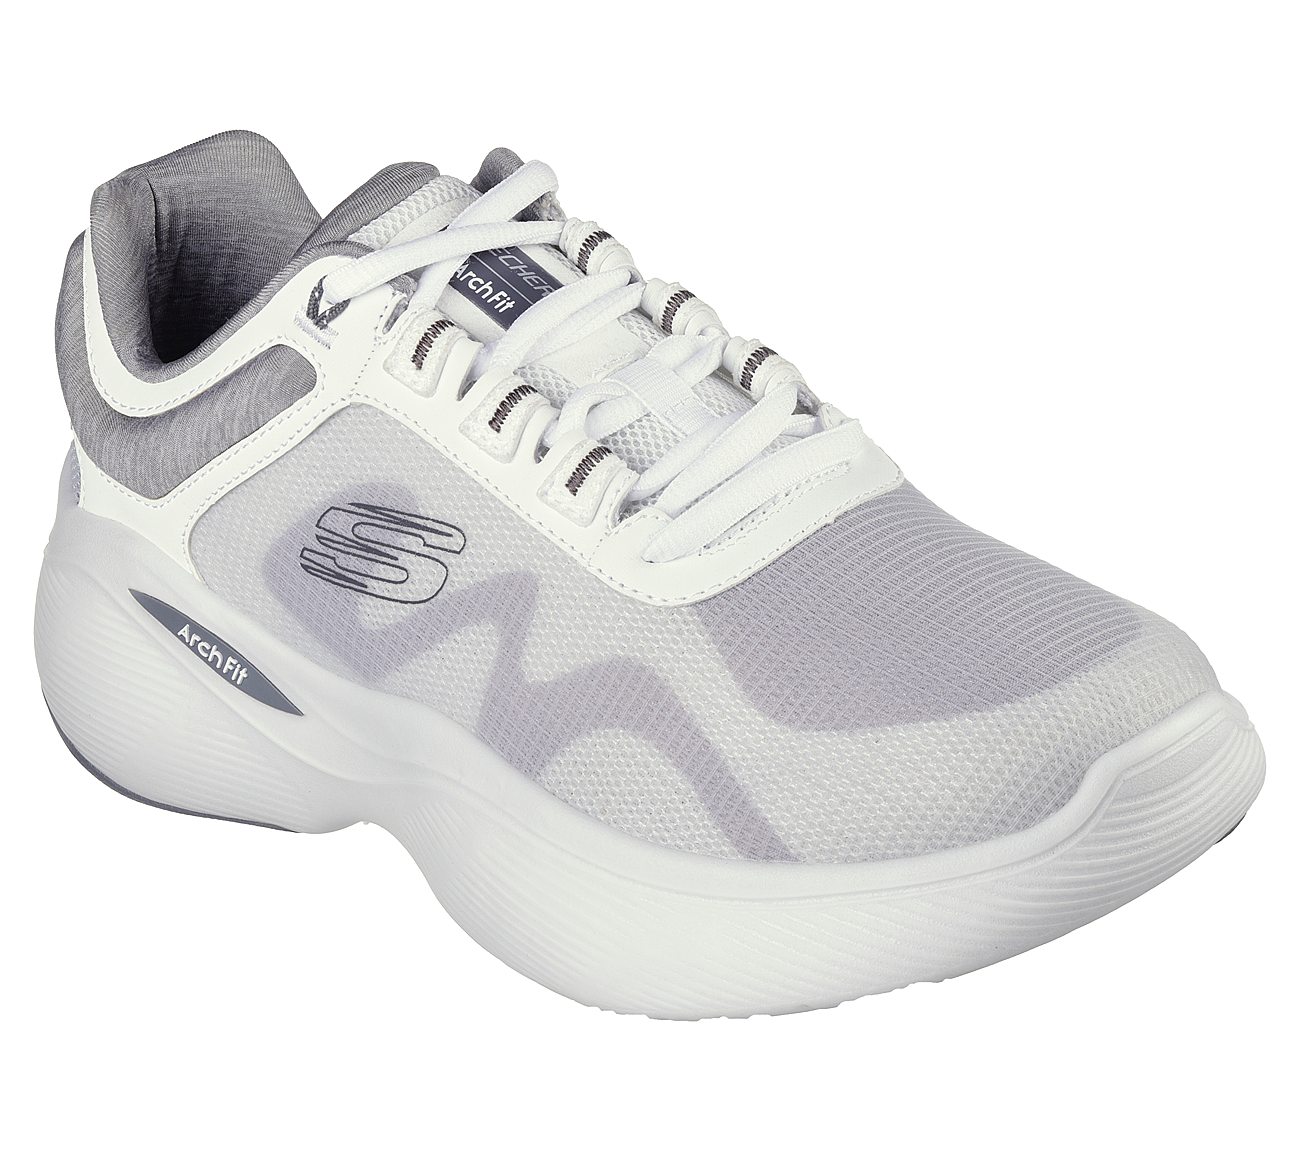 ARCH FIT INFINITY, WHITE/GREY Footwear Right View